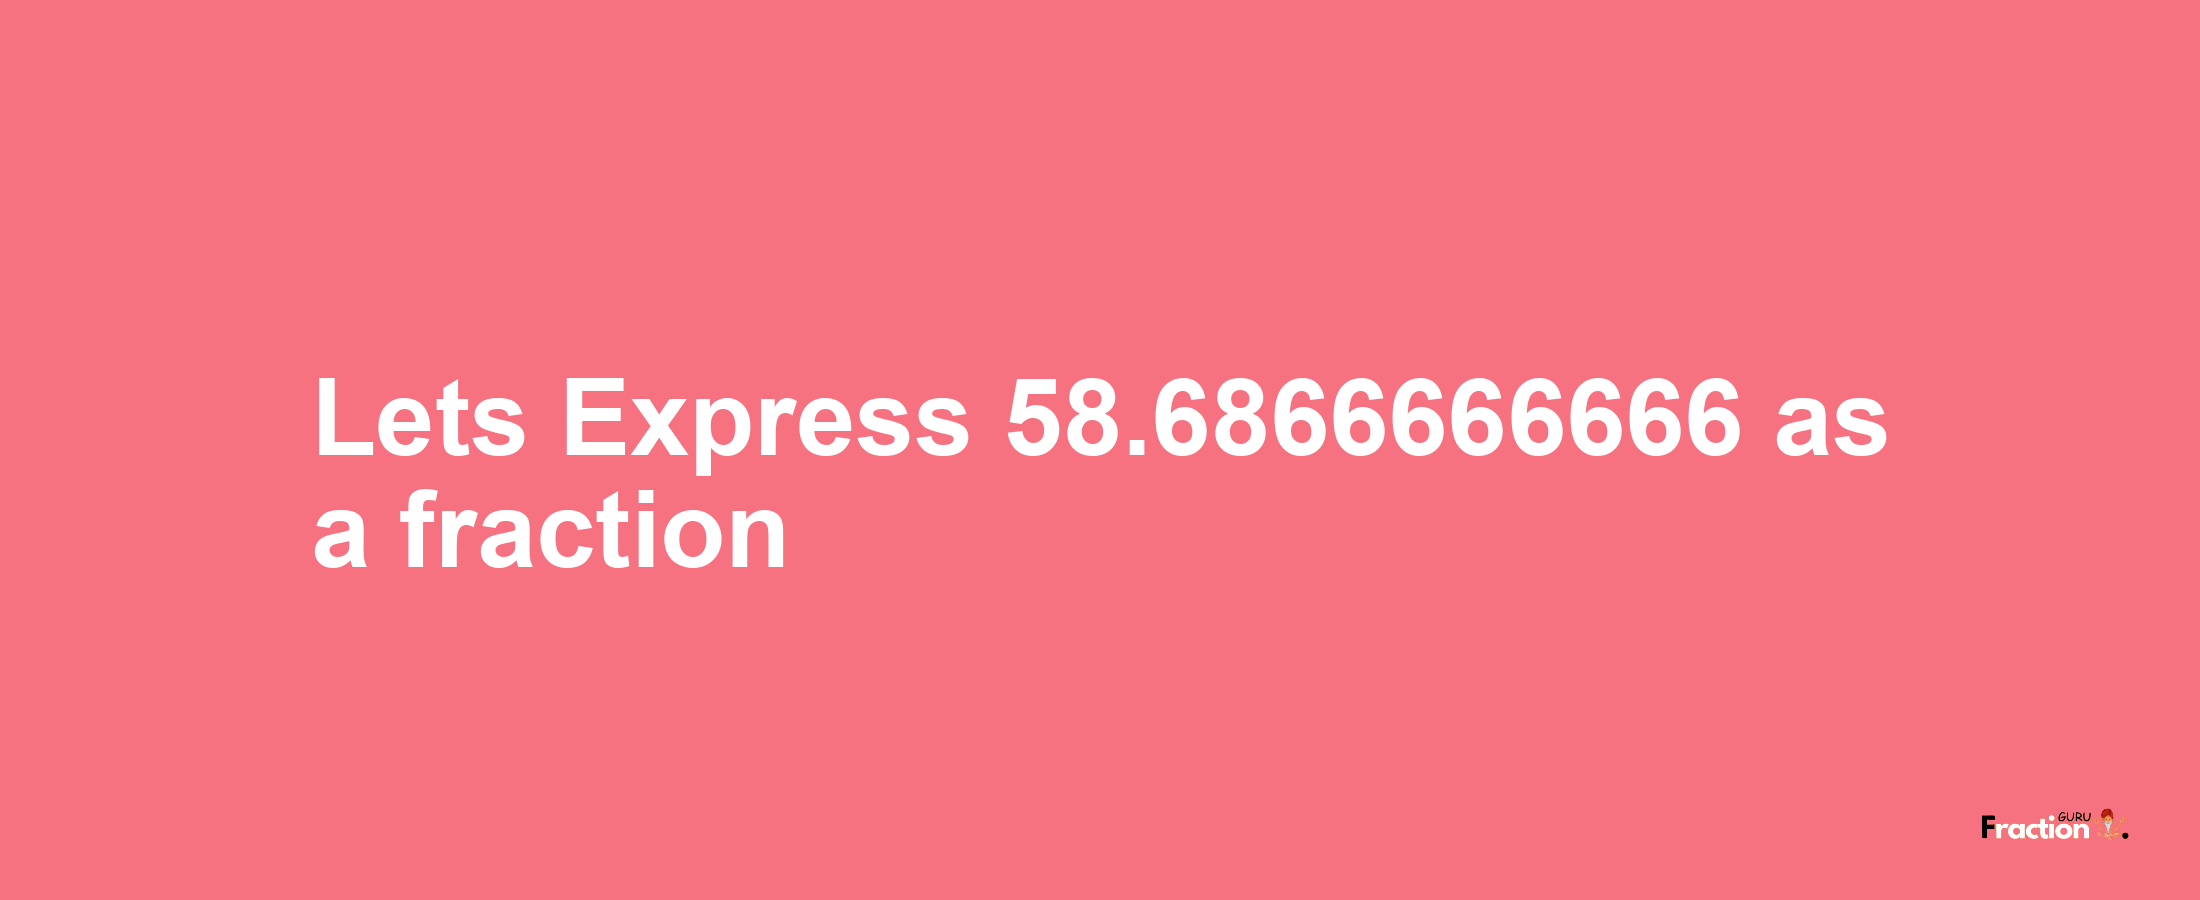 Lets Express 58.6866666666 as afraction